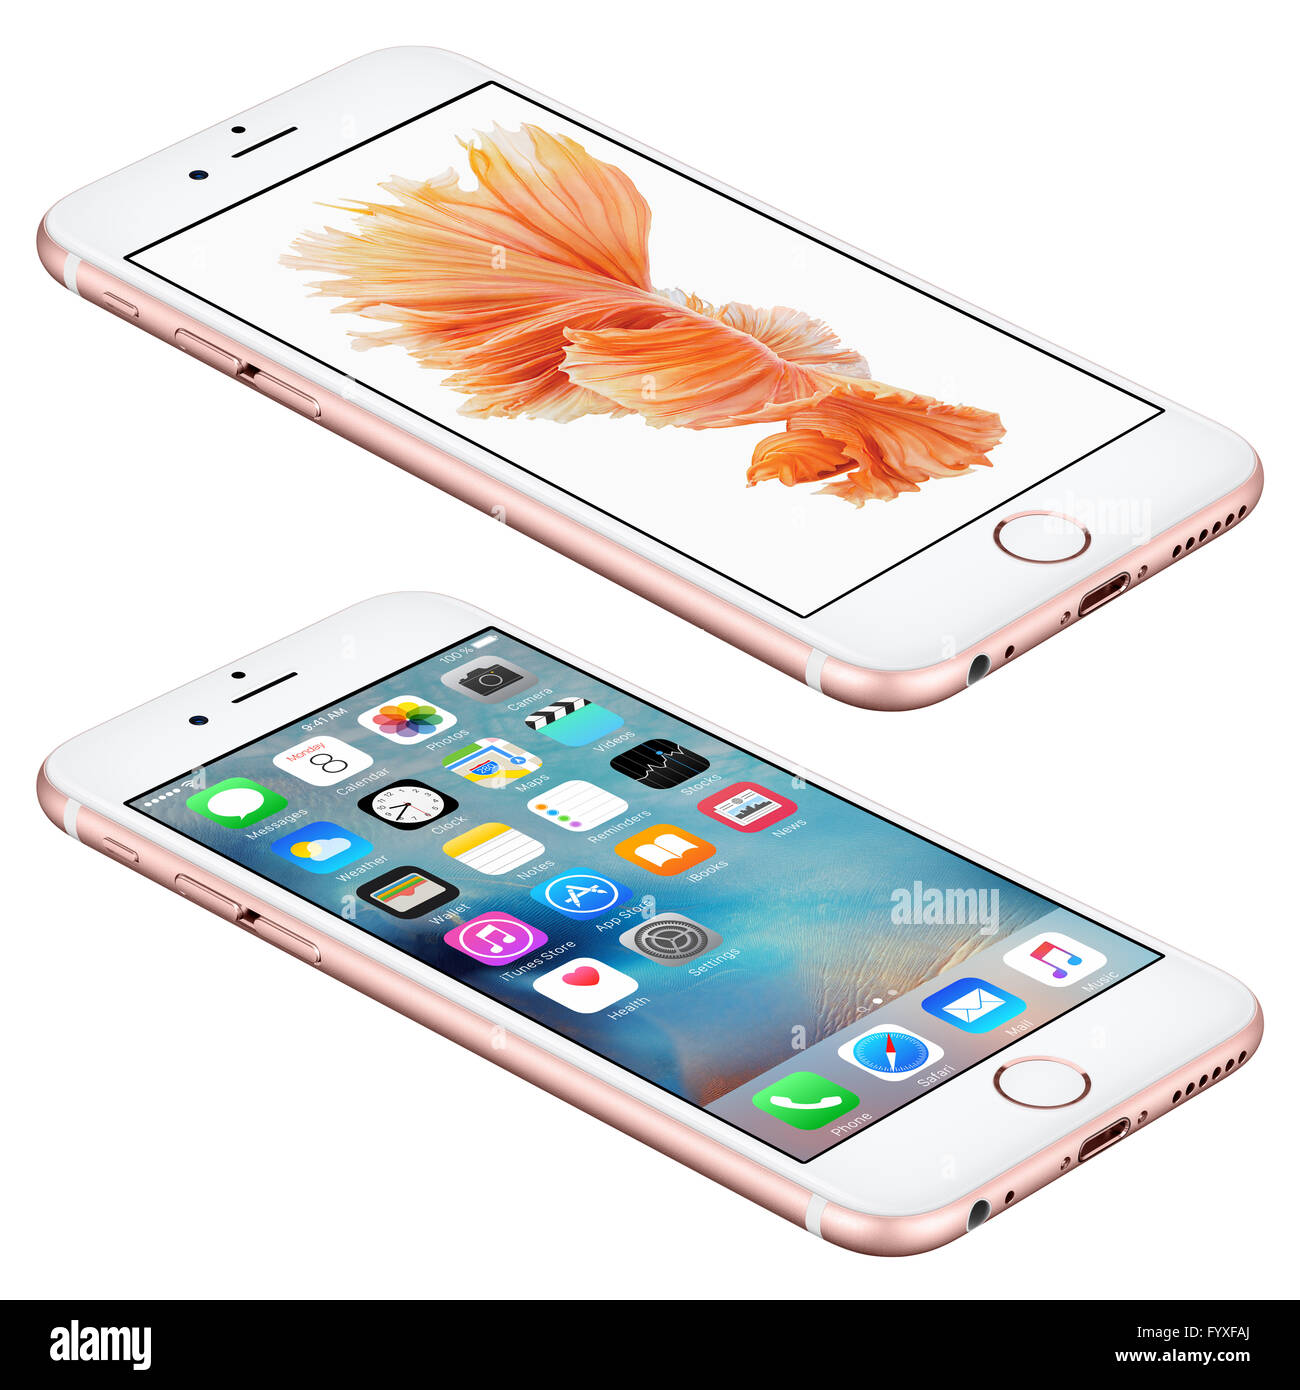 Varna, Bulgaria - October 25, 2015: Rose Gold Apple iPhone 6S lies on the surface with iOS 9 mobile operating system Stock Photo